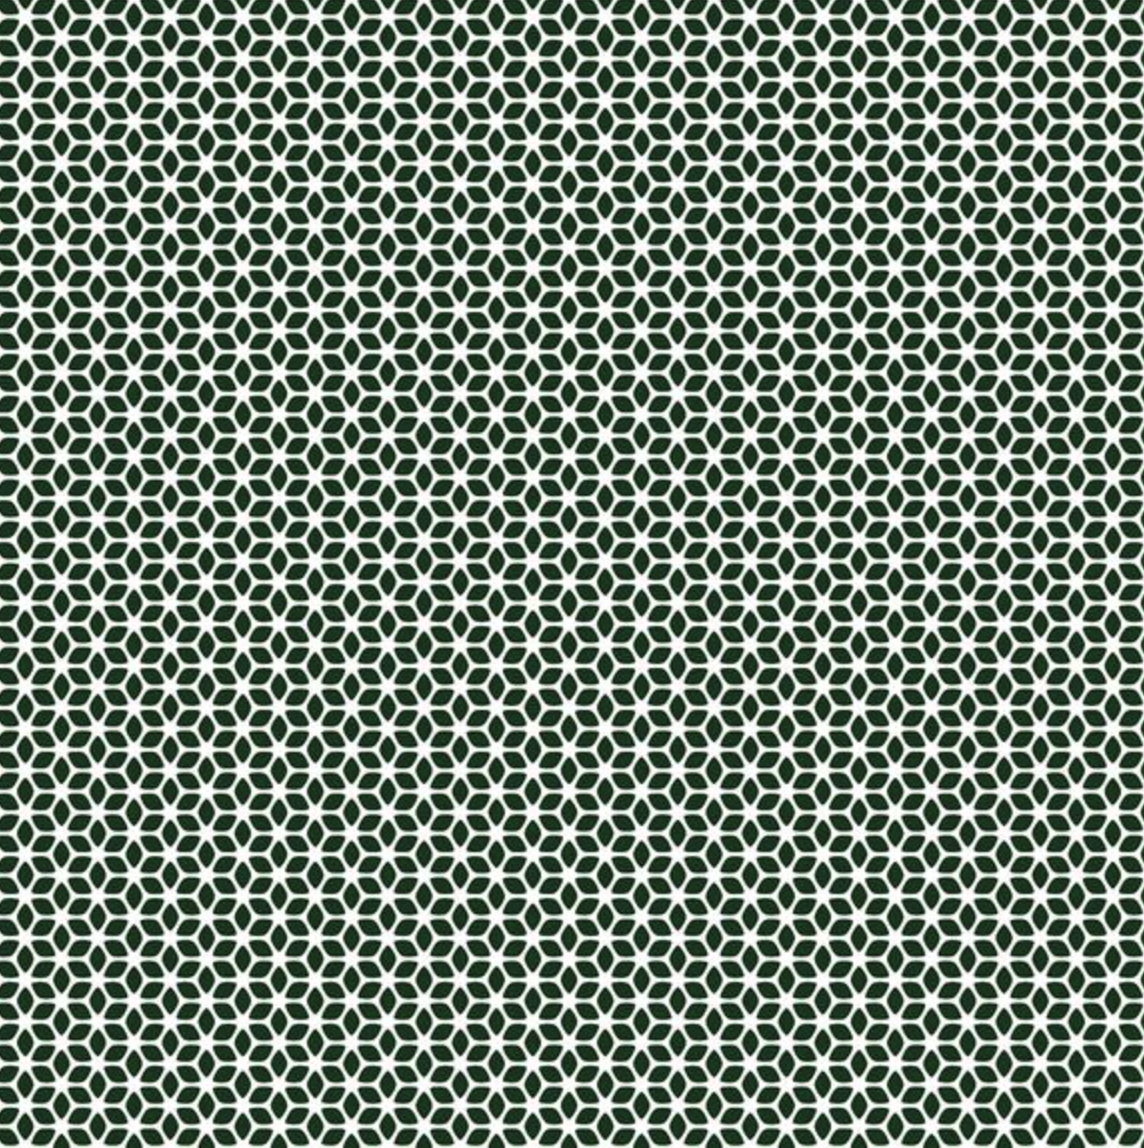 Showerwall Acrylic Patterns & Tiles Collection - Retro Emerald